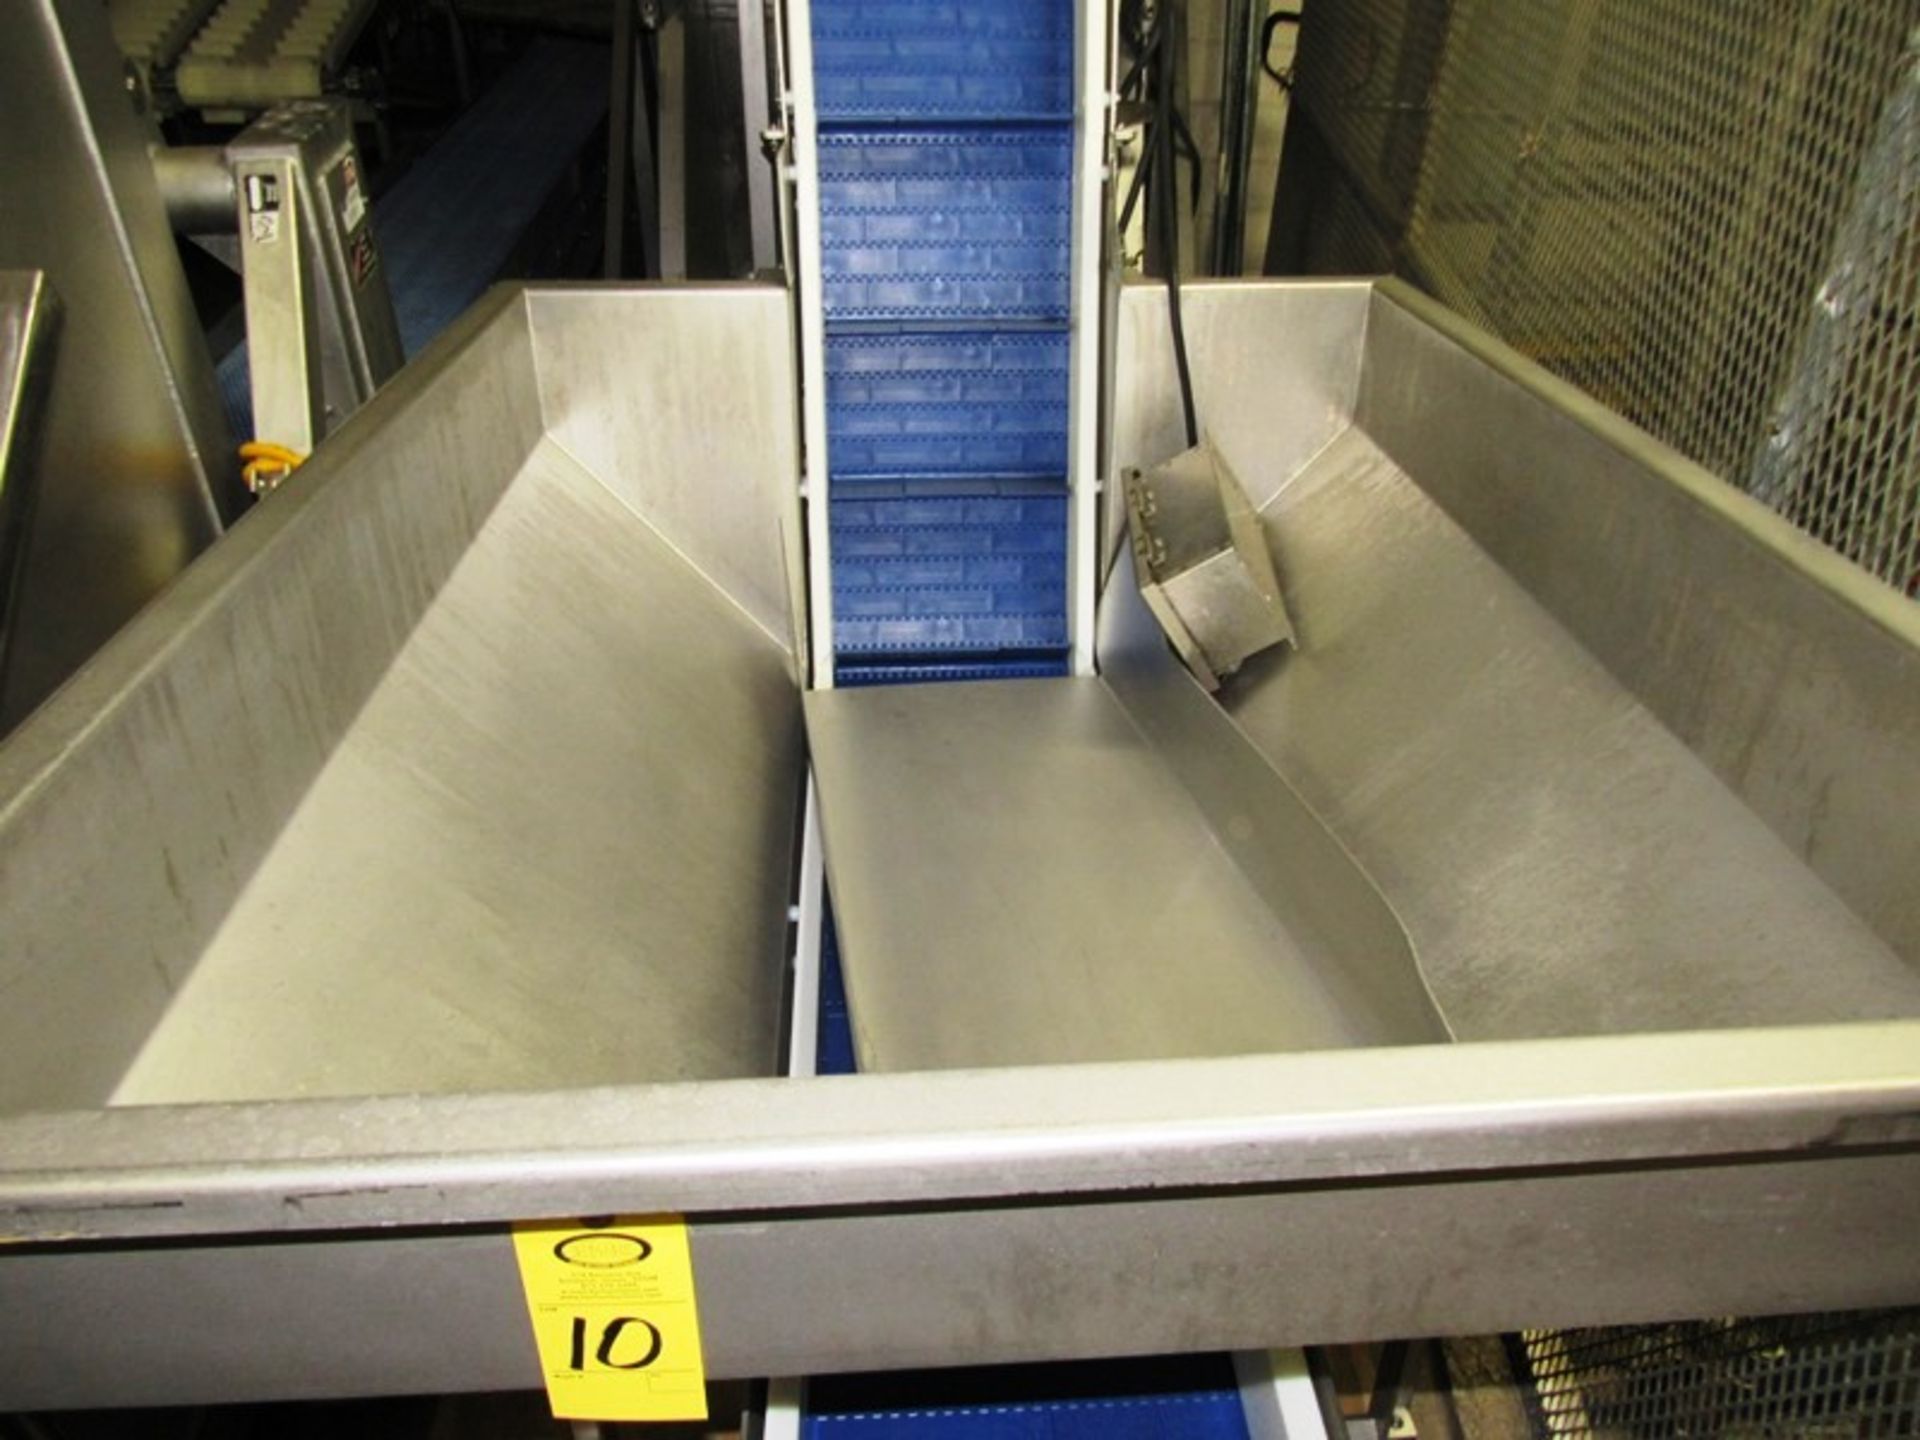 Stainless Steel Z Incline Conveyor with stainless steel hopper, 18" W X 12' L flighted plastic belt, - Image 3 of 6